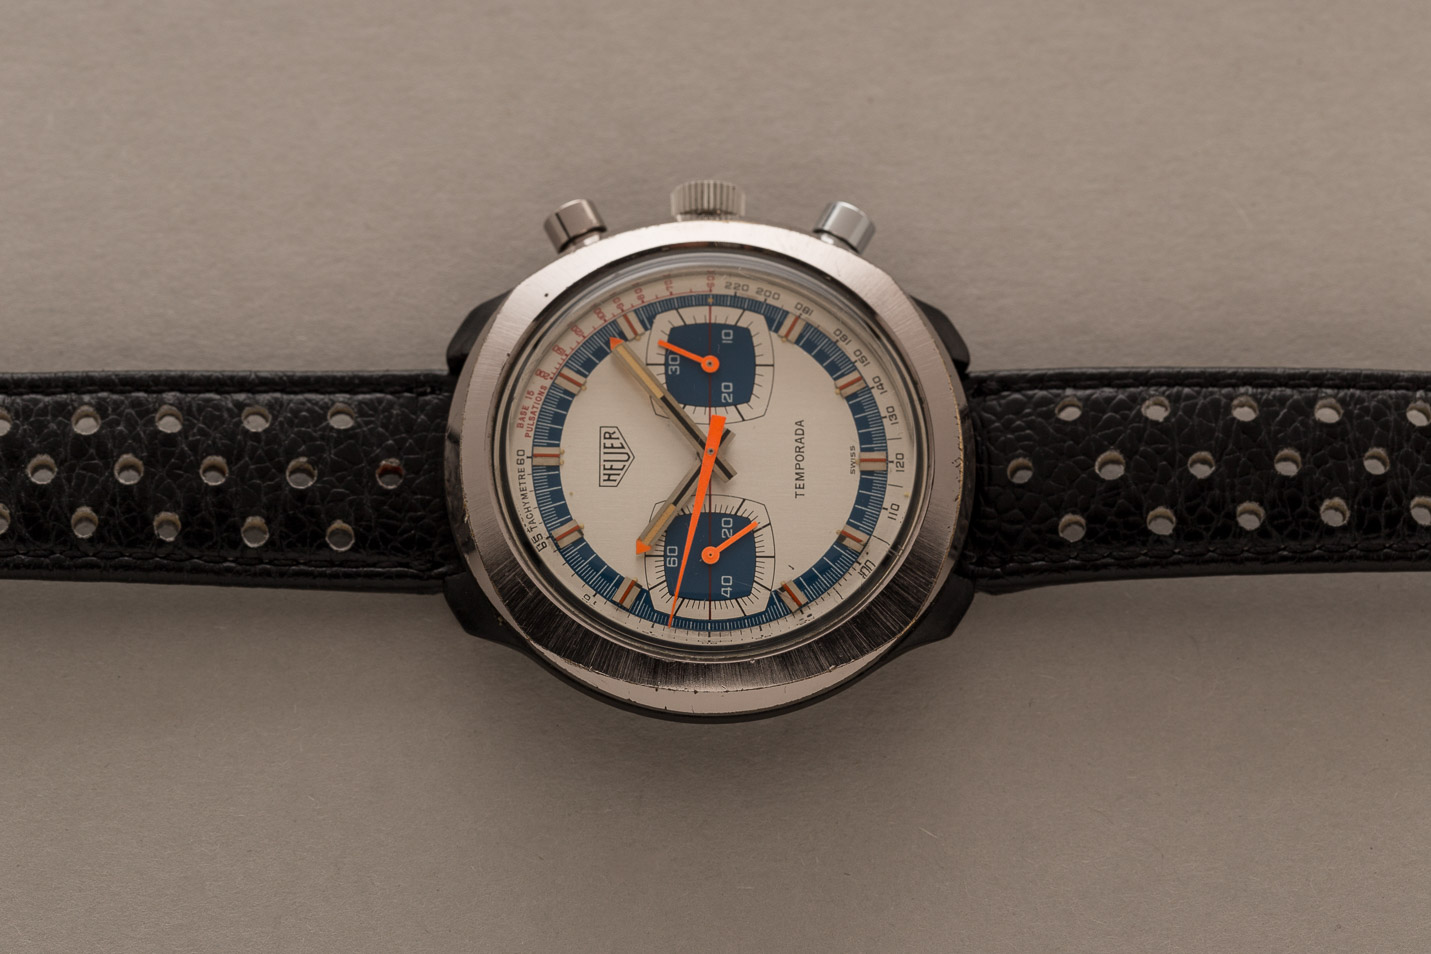 Heuer Temporada Vintage Chronograph - Shuck the Oyster Vintage Watches